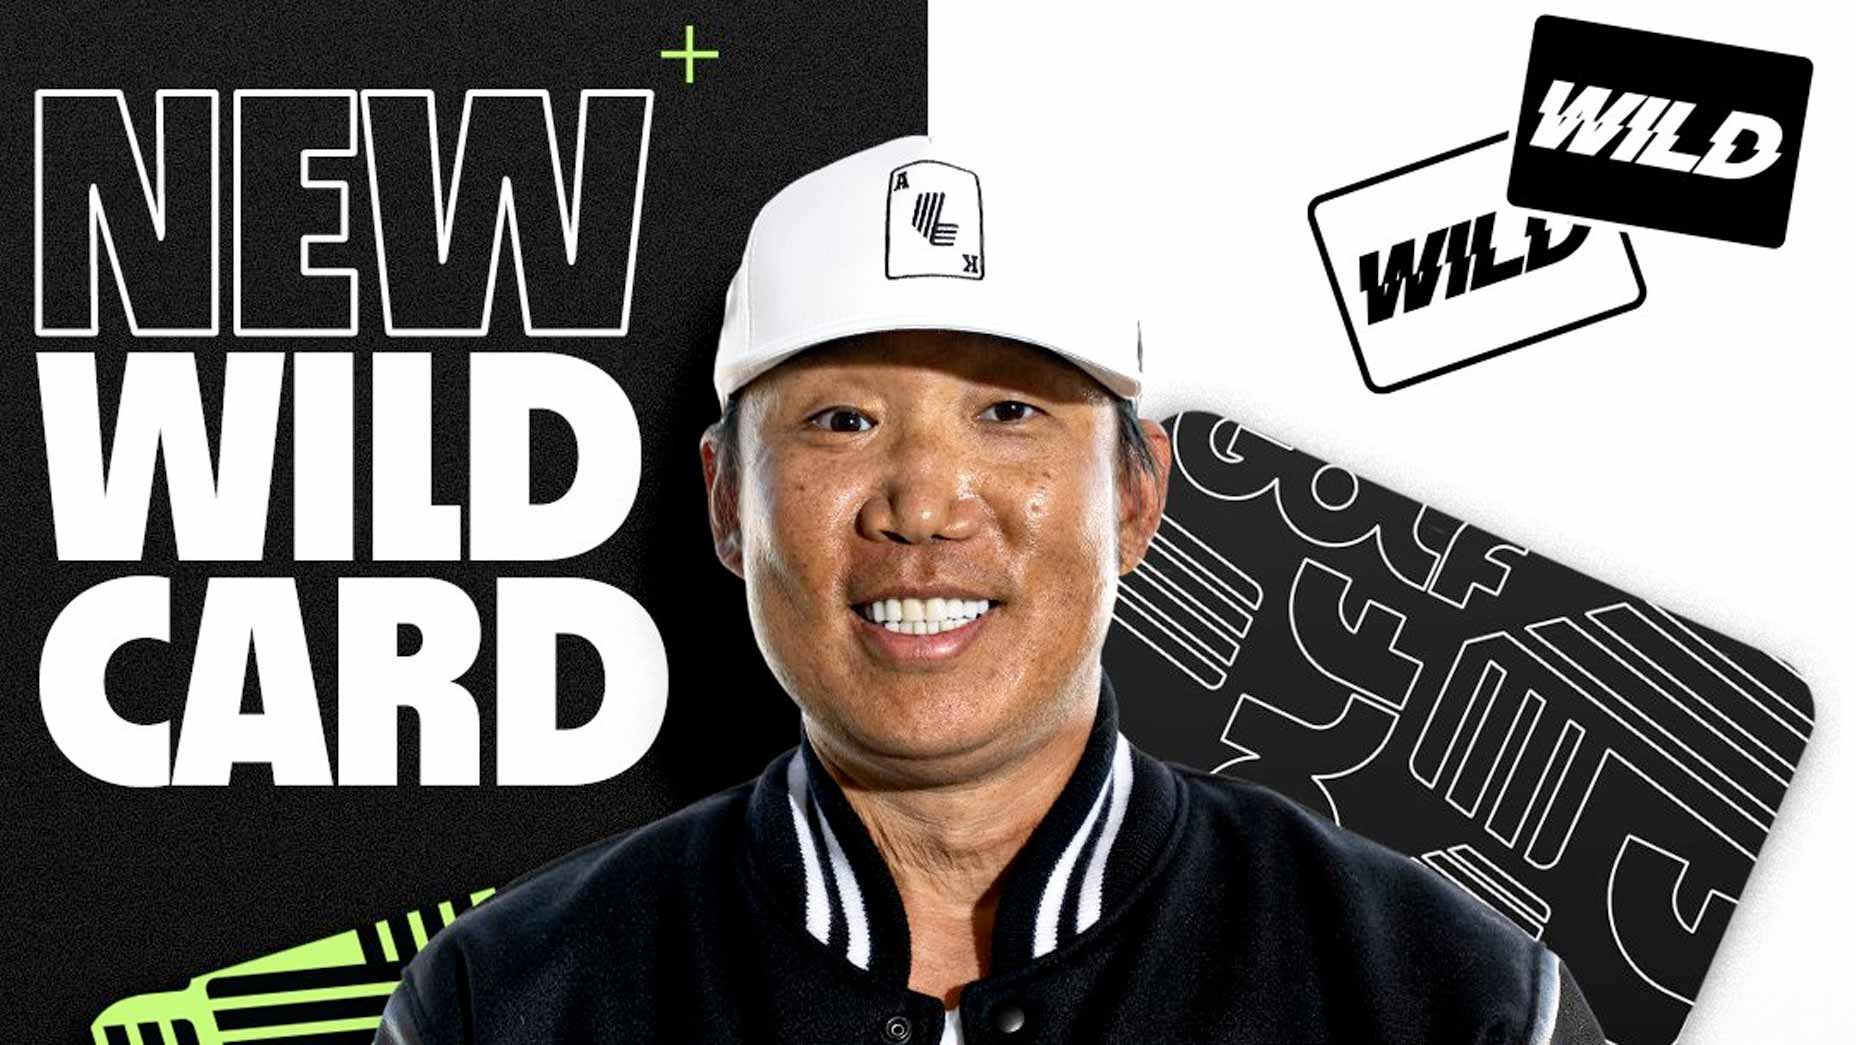 Anthony Kim featured in LIV Golf social media post